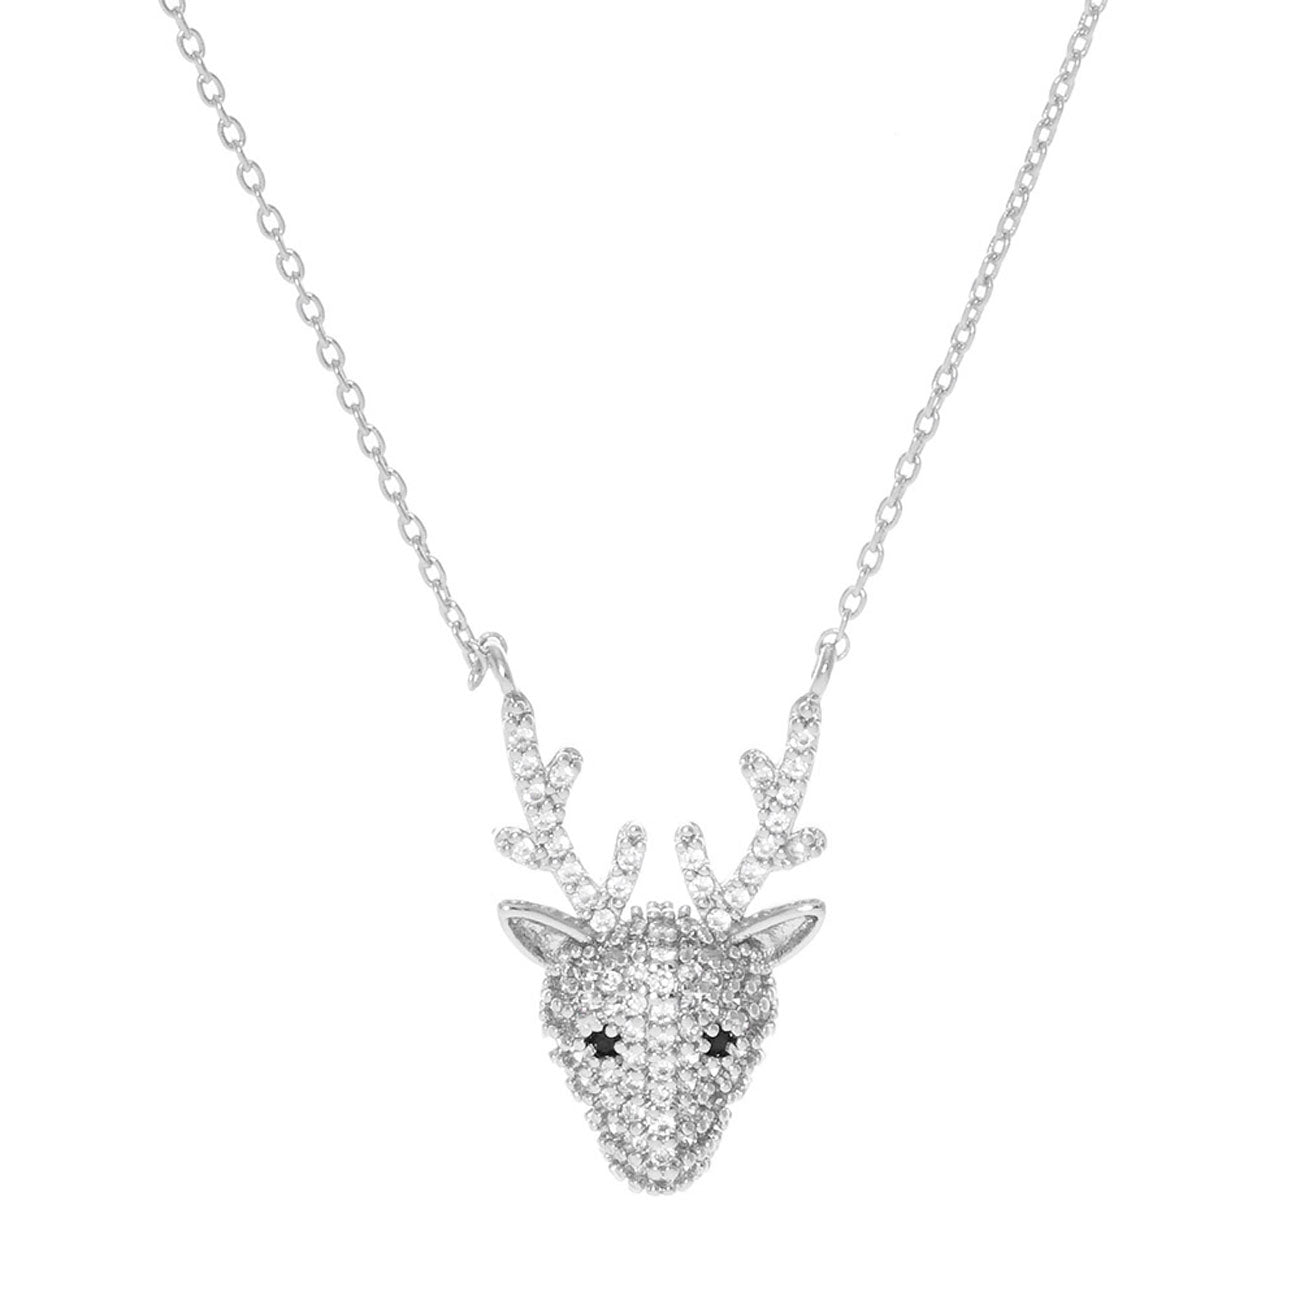 Rhodium White Gold Dipped CZ Rudolph Pendant Necklace. Beautifully crafted design adds a gorgeous glow to any outfit. Jewelry that fits your lifestyle! Perfect Birthday Gift, Anniversary Gift, Mother's Day Gift, Anniversary Gift, Graduation Gift, Prom Jewelry, Just Because Gift, Thank you Gift.